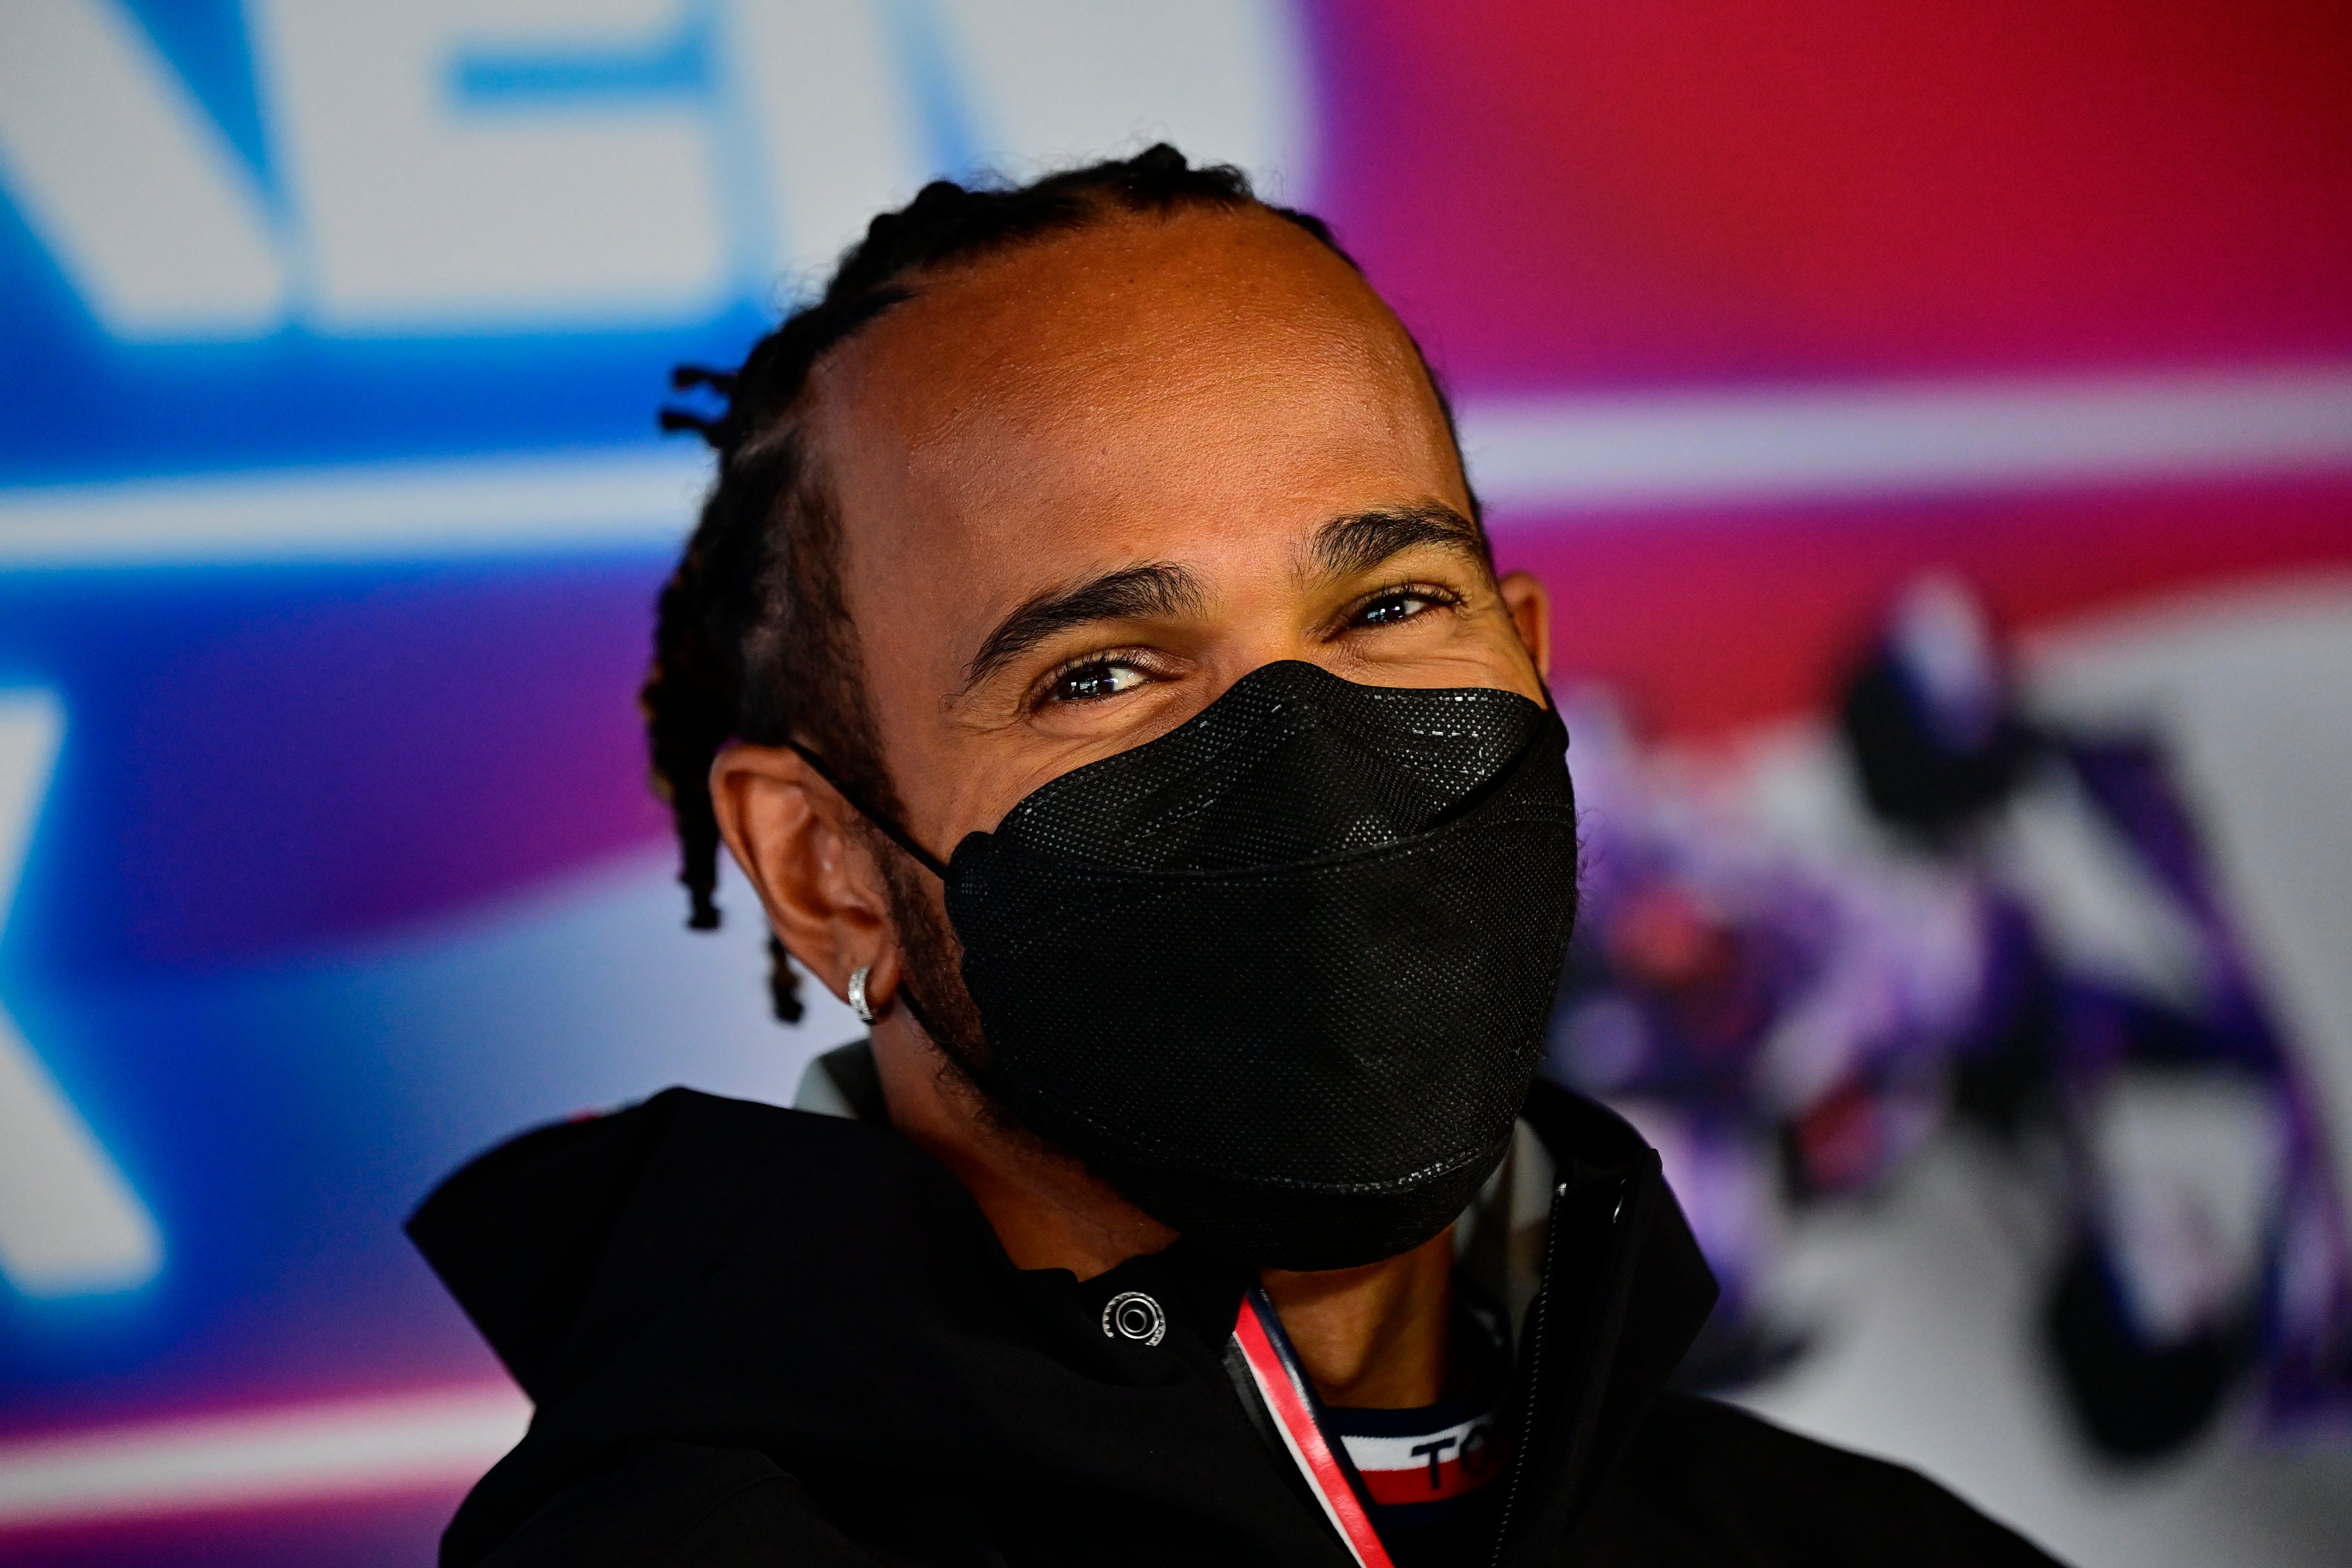 Lewis Hamilton is set to be paired with George Russell next season